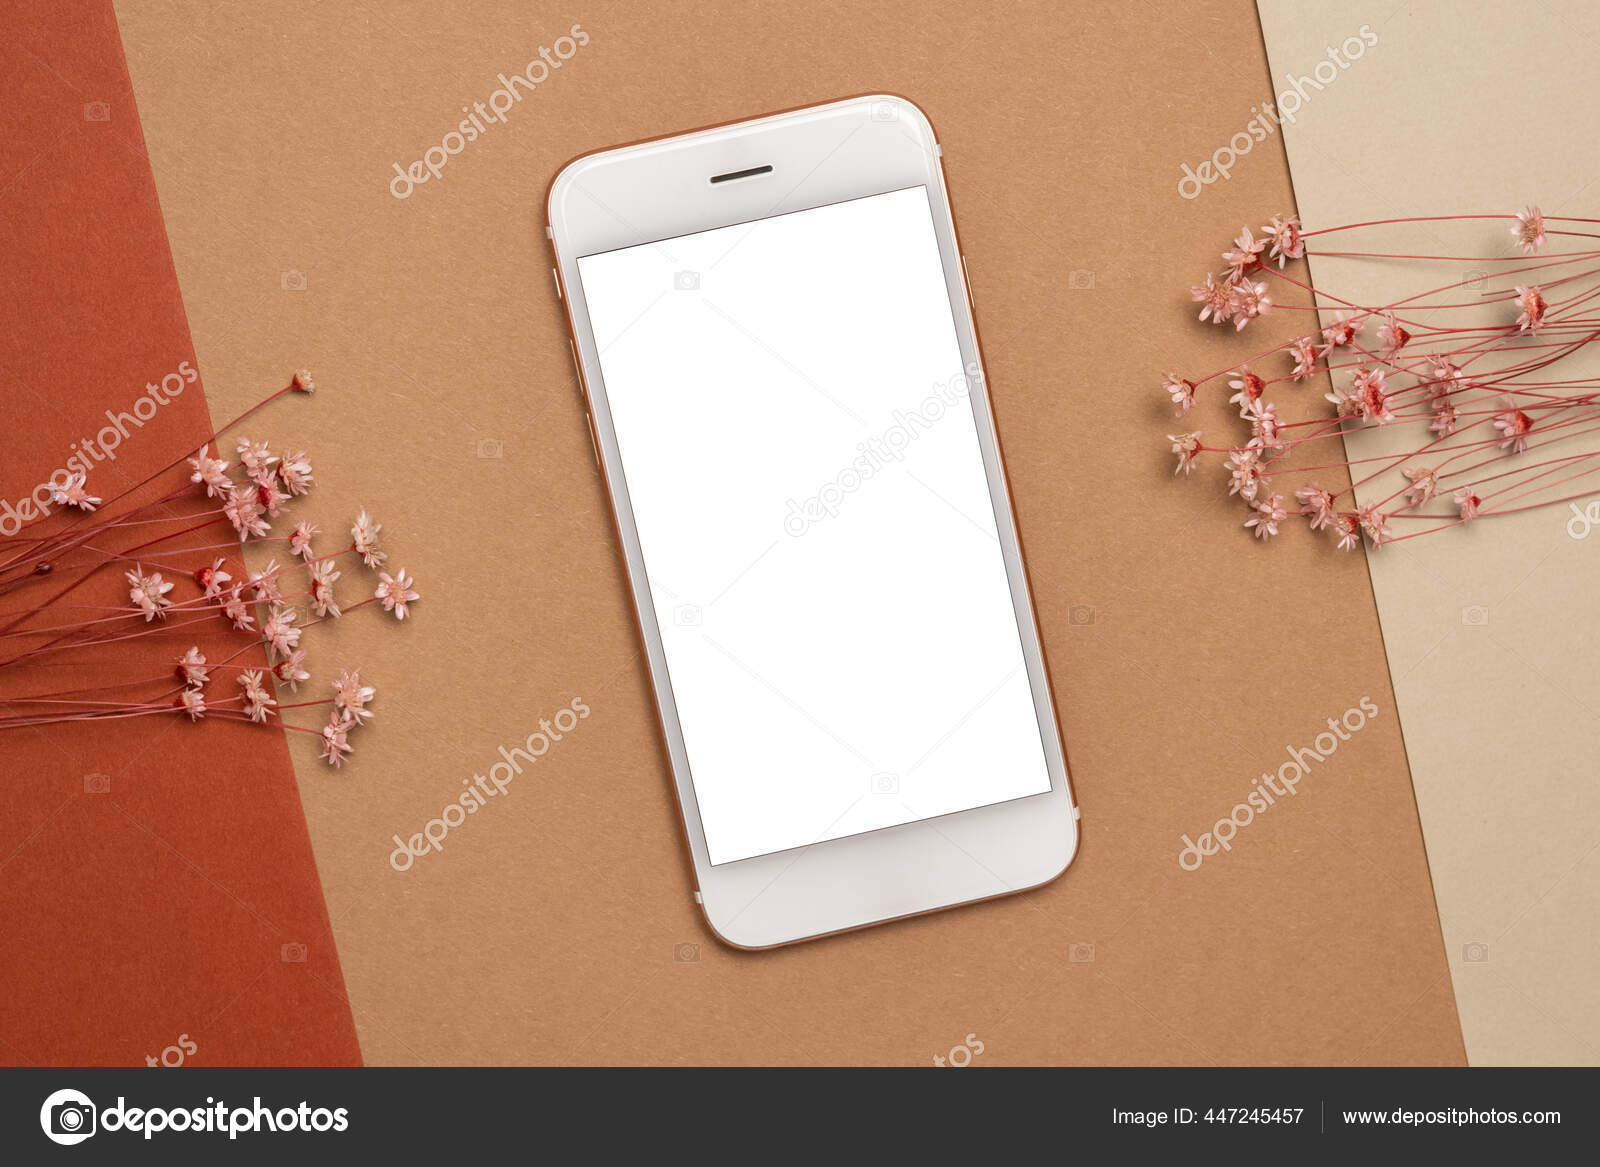 Dry flower branch on a light brown background. Trend, minimal